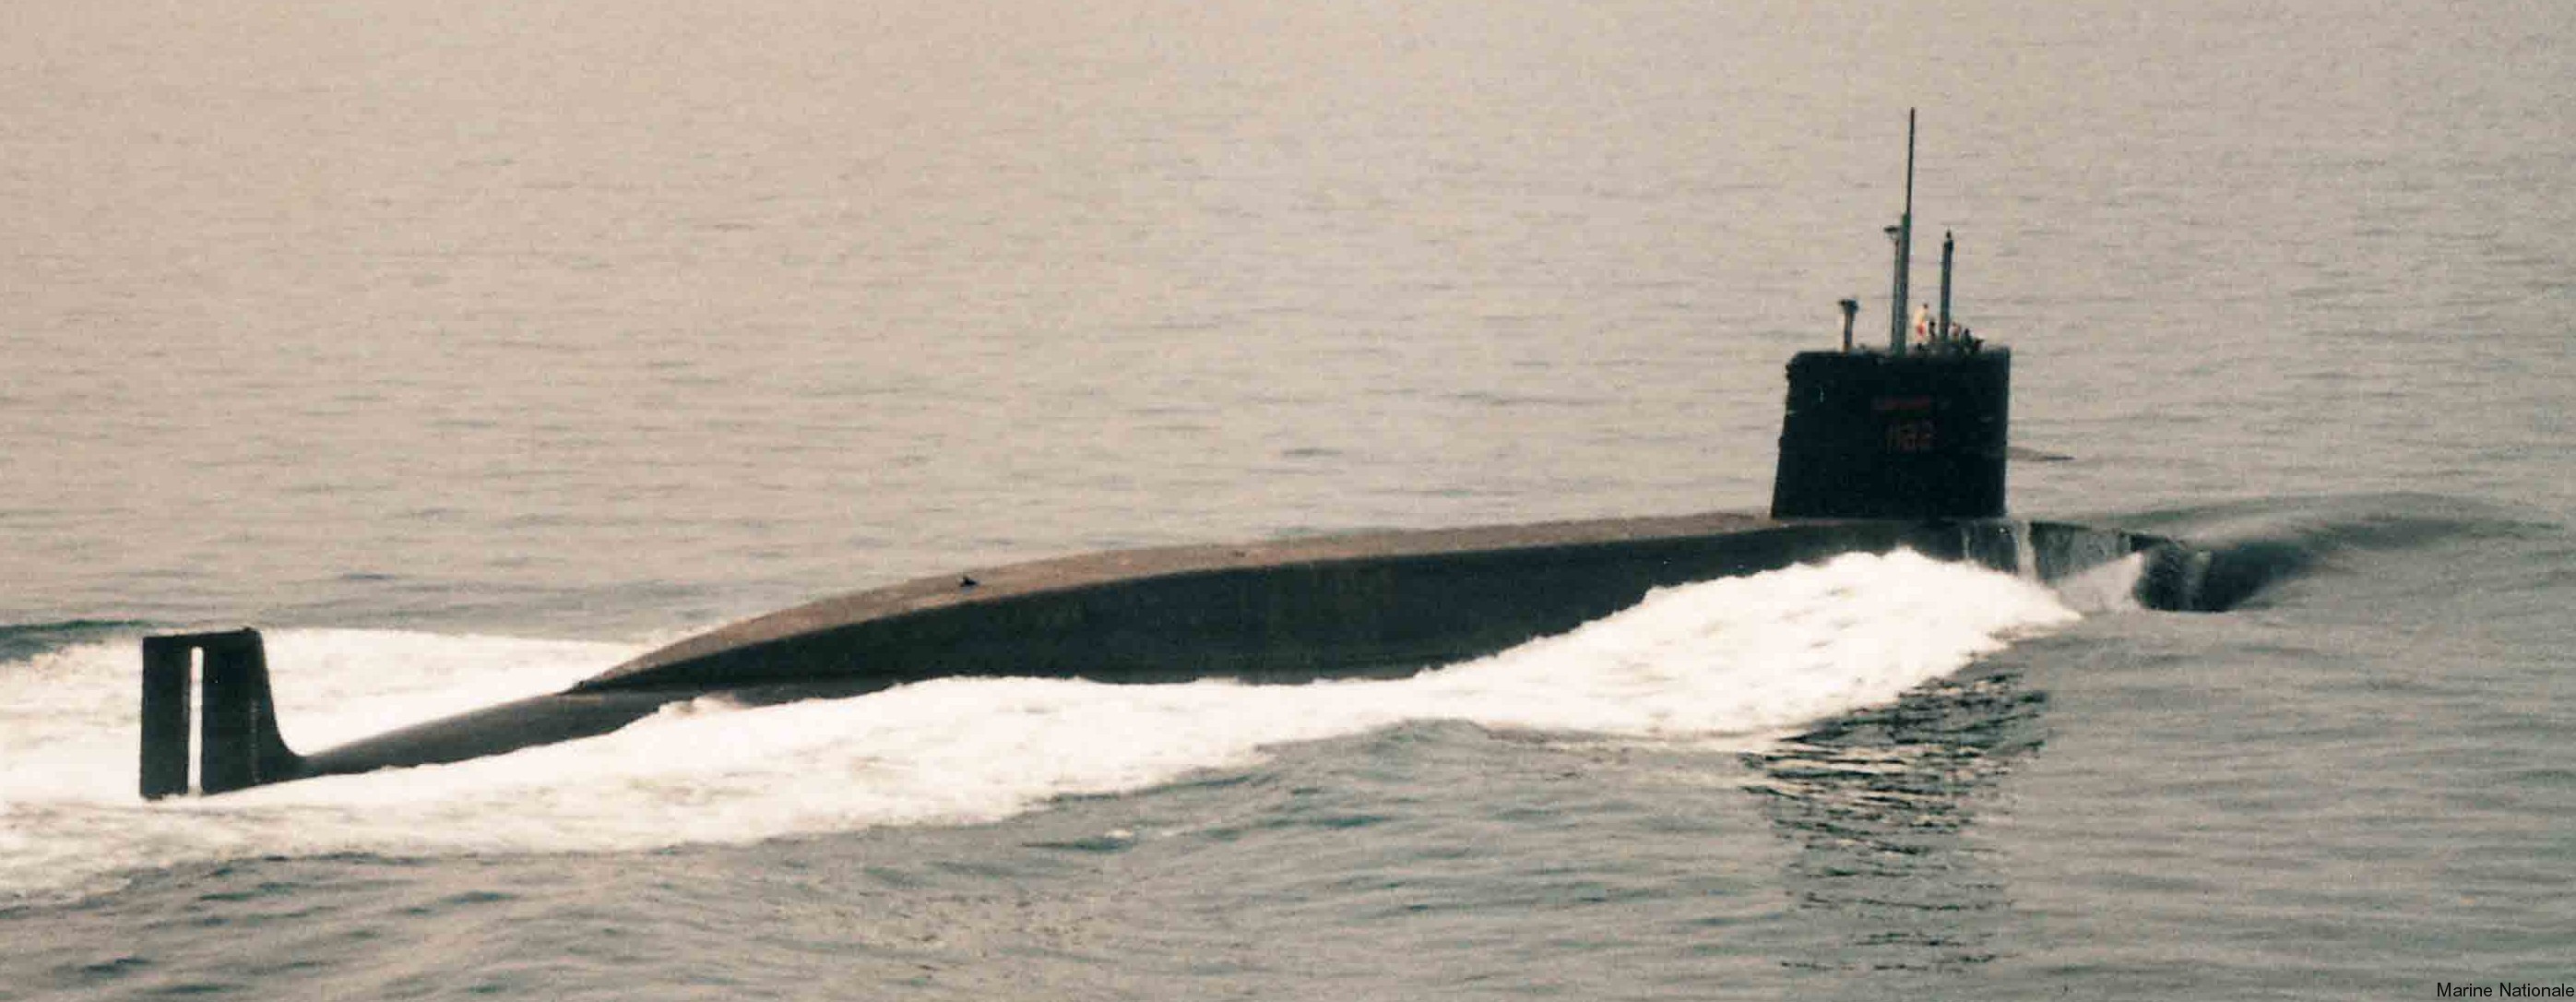 le redoutable class ballistic missile submarine ssbn snle french navy marine nationale terrible foudroyant indomptable tonnant inflexible 04